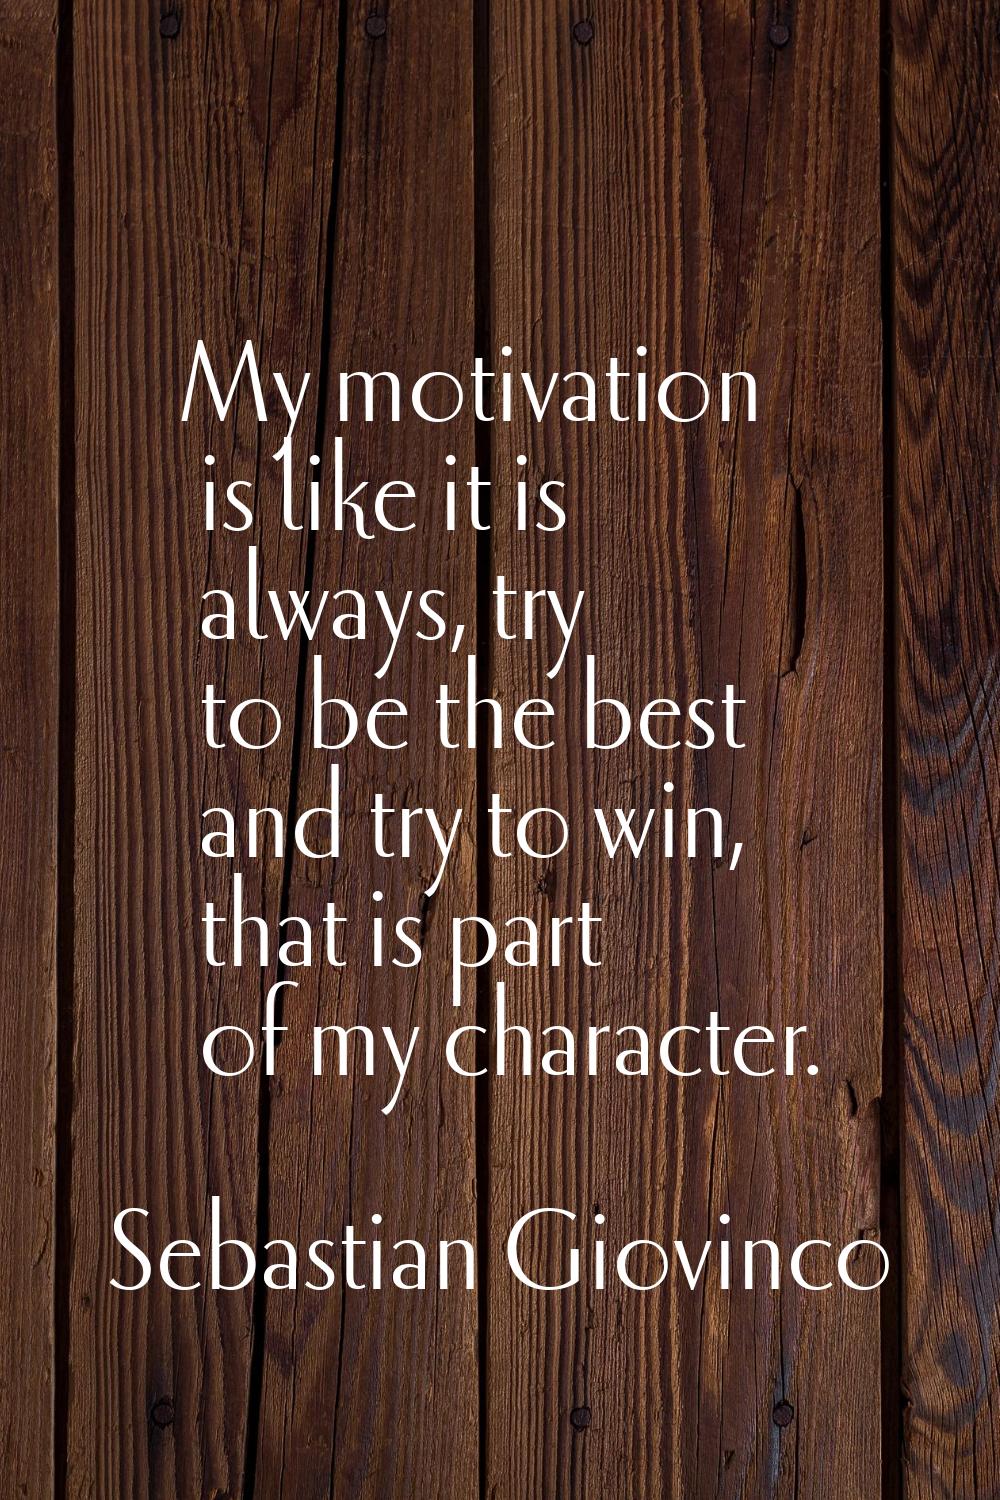 My motivation is like it is always, try to be the best and try to win, that is part of my character